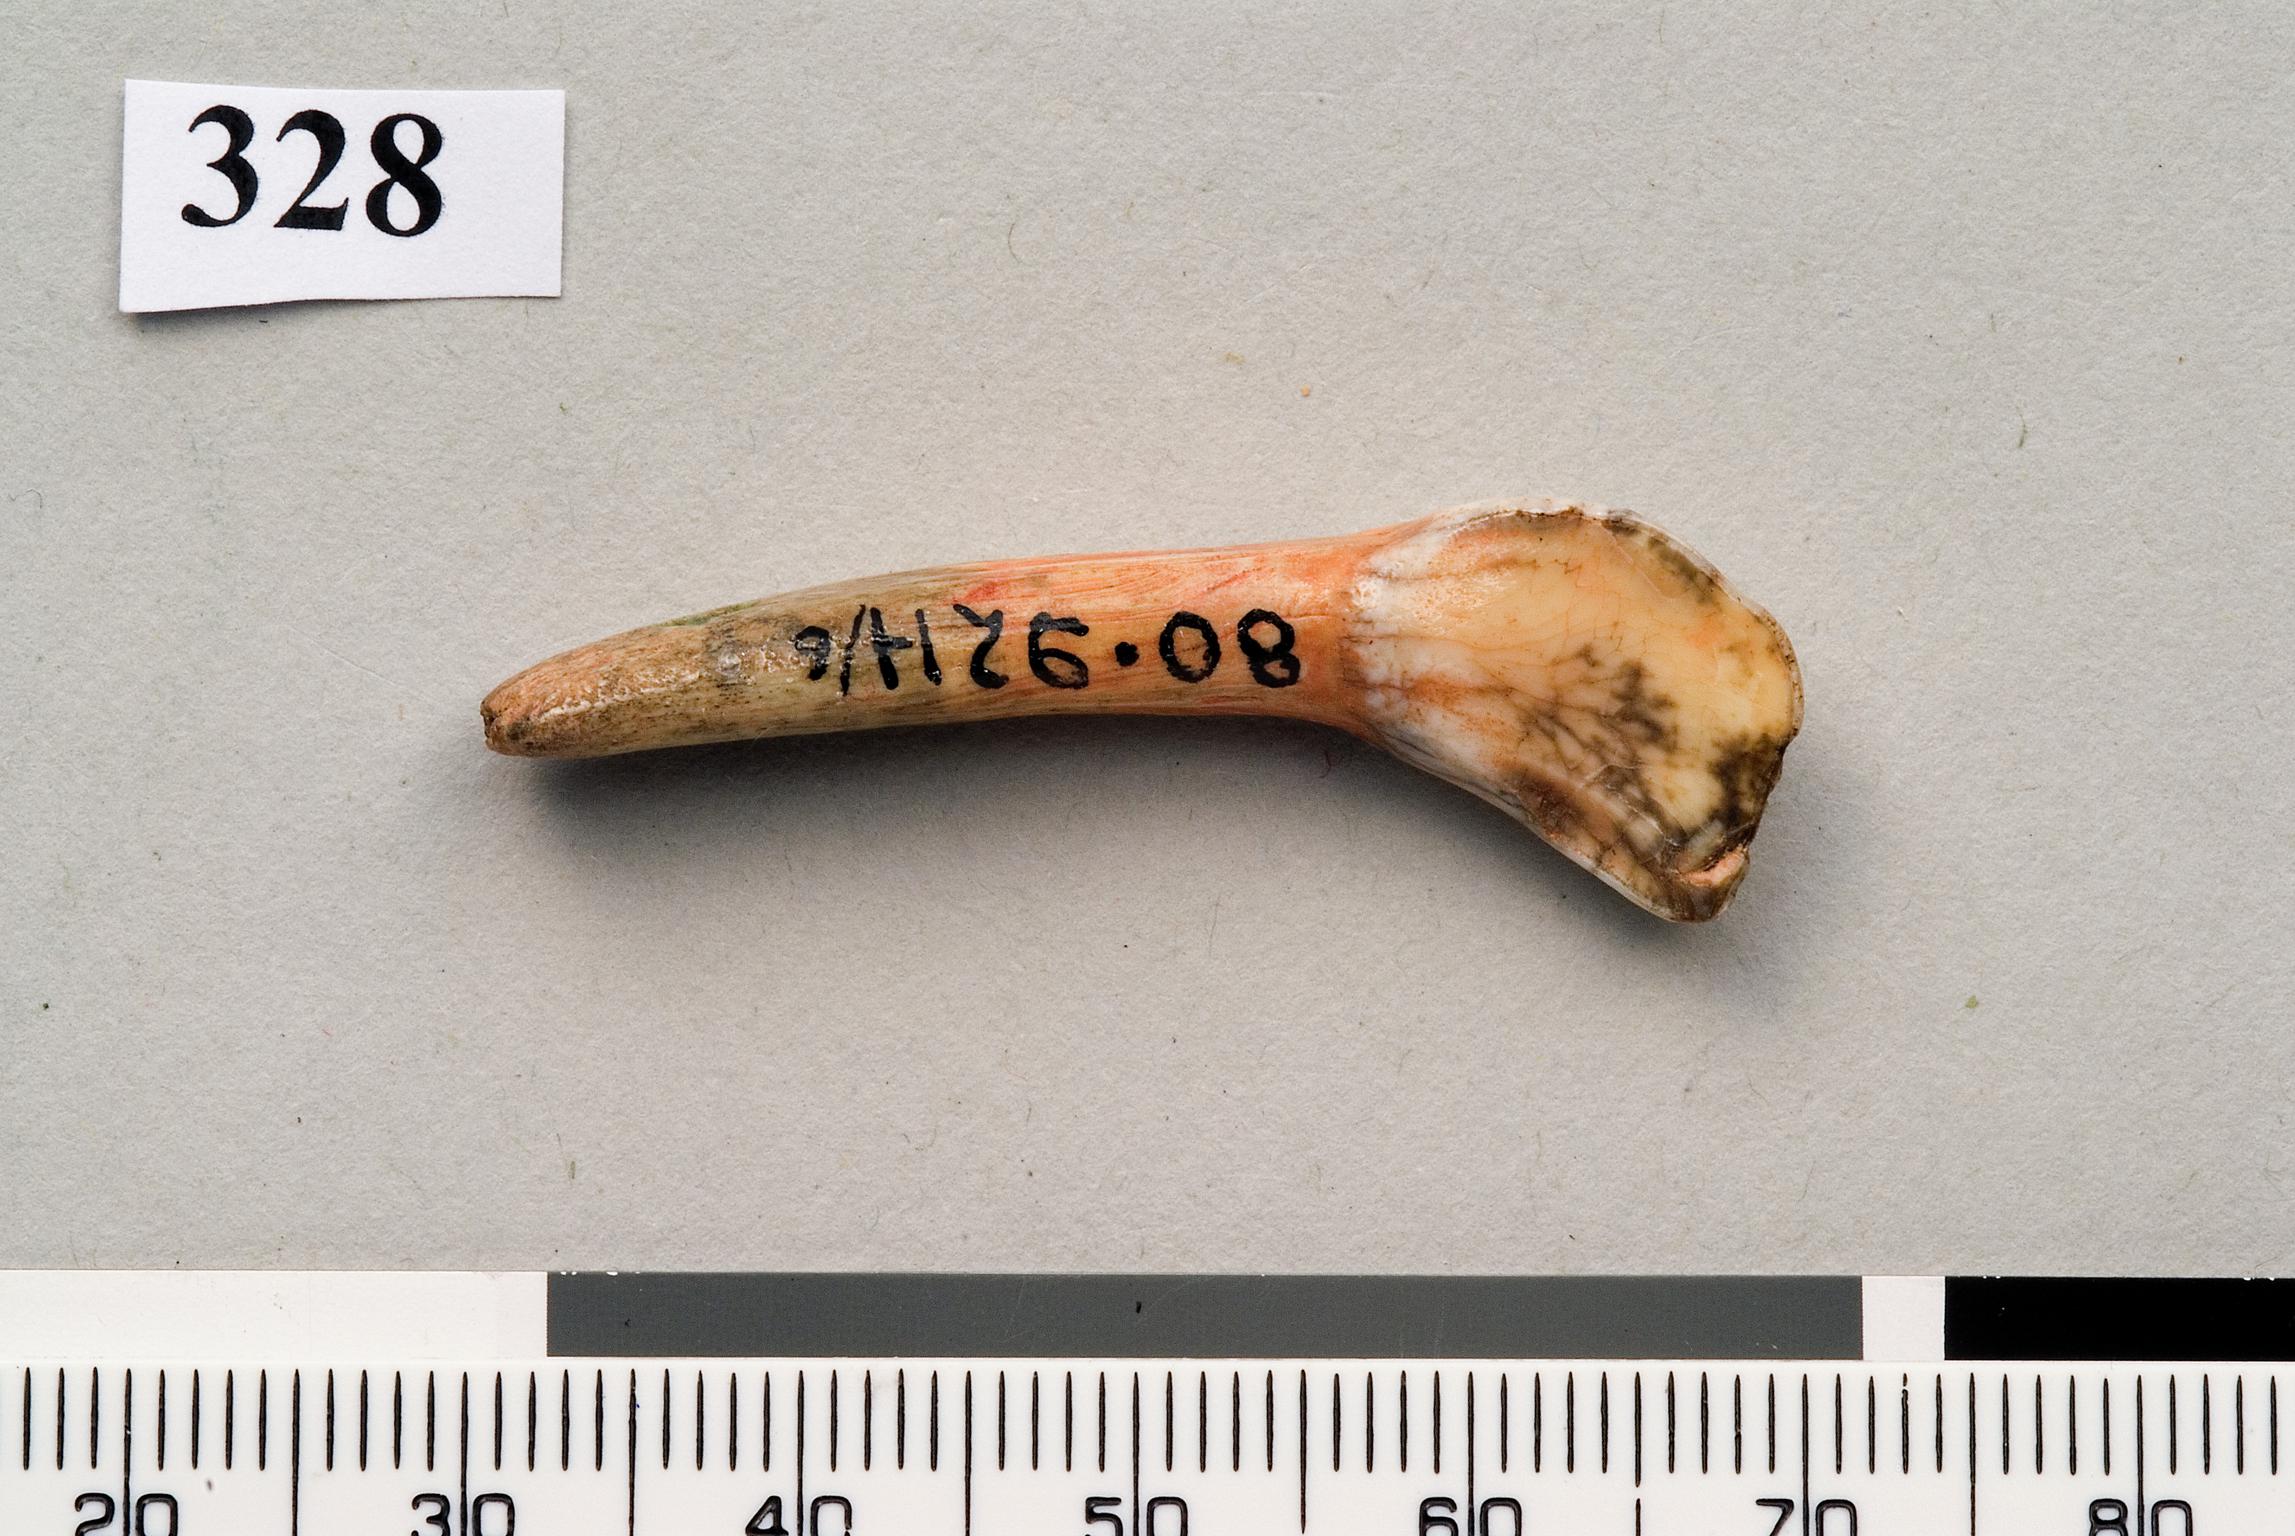 Upper Palaeolithic perforated tooth